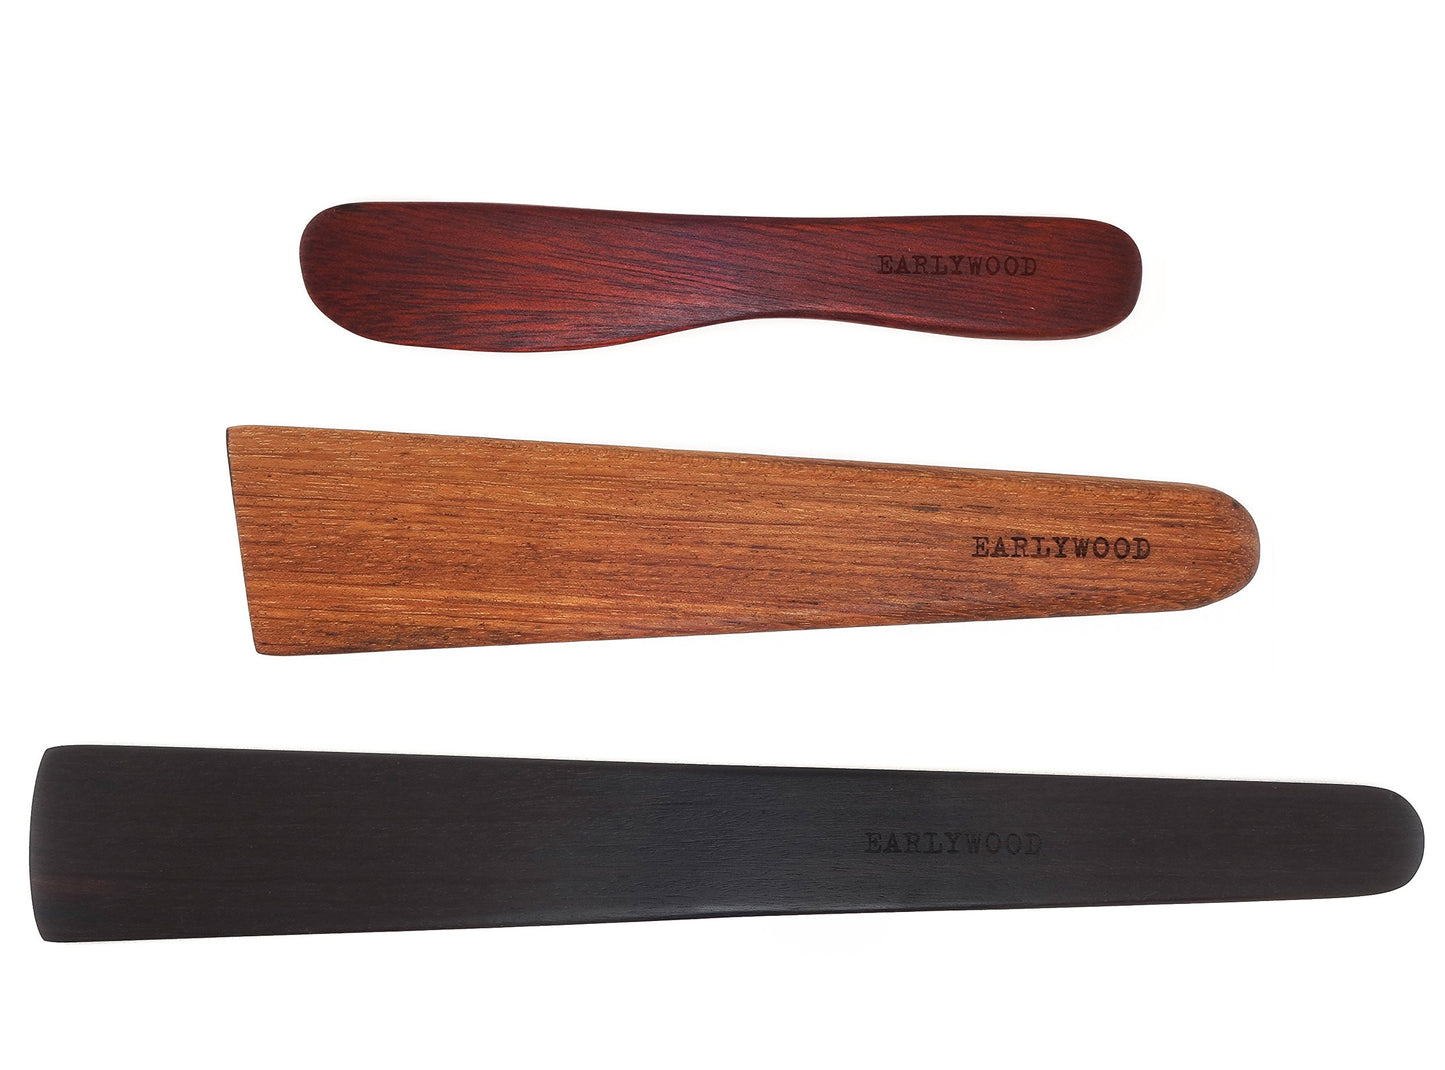 3-Piece Wooden Kitchen Cooking Utensil Set - Comes w/a Thin Wood Spatula Flipper, Wooden Cast Iron Scraper Stirrer and Butter Turner/Cheese Spreader